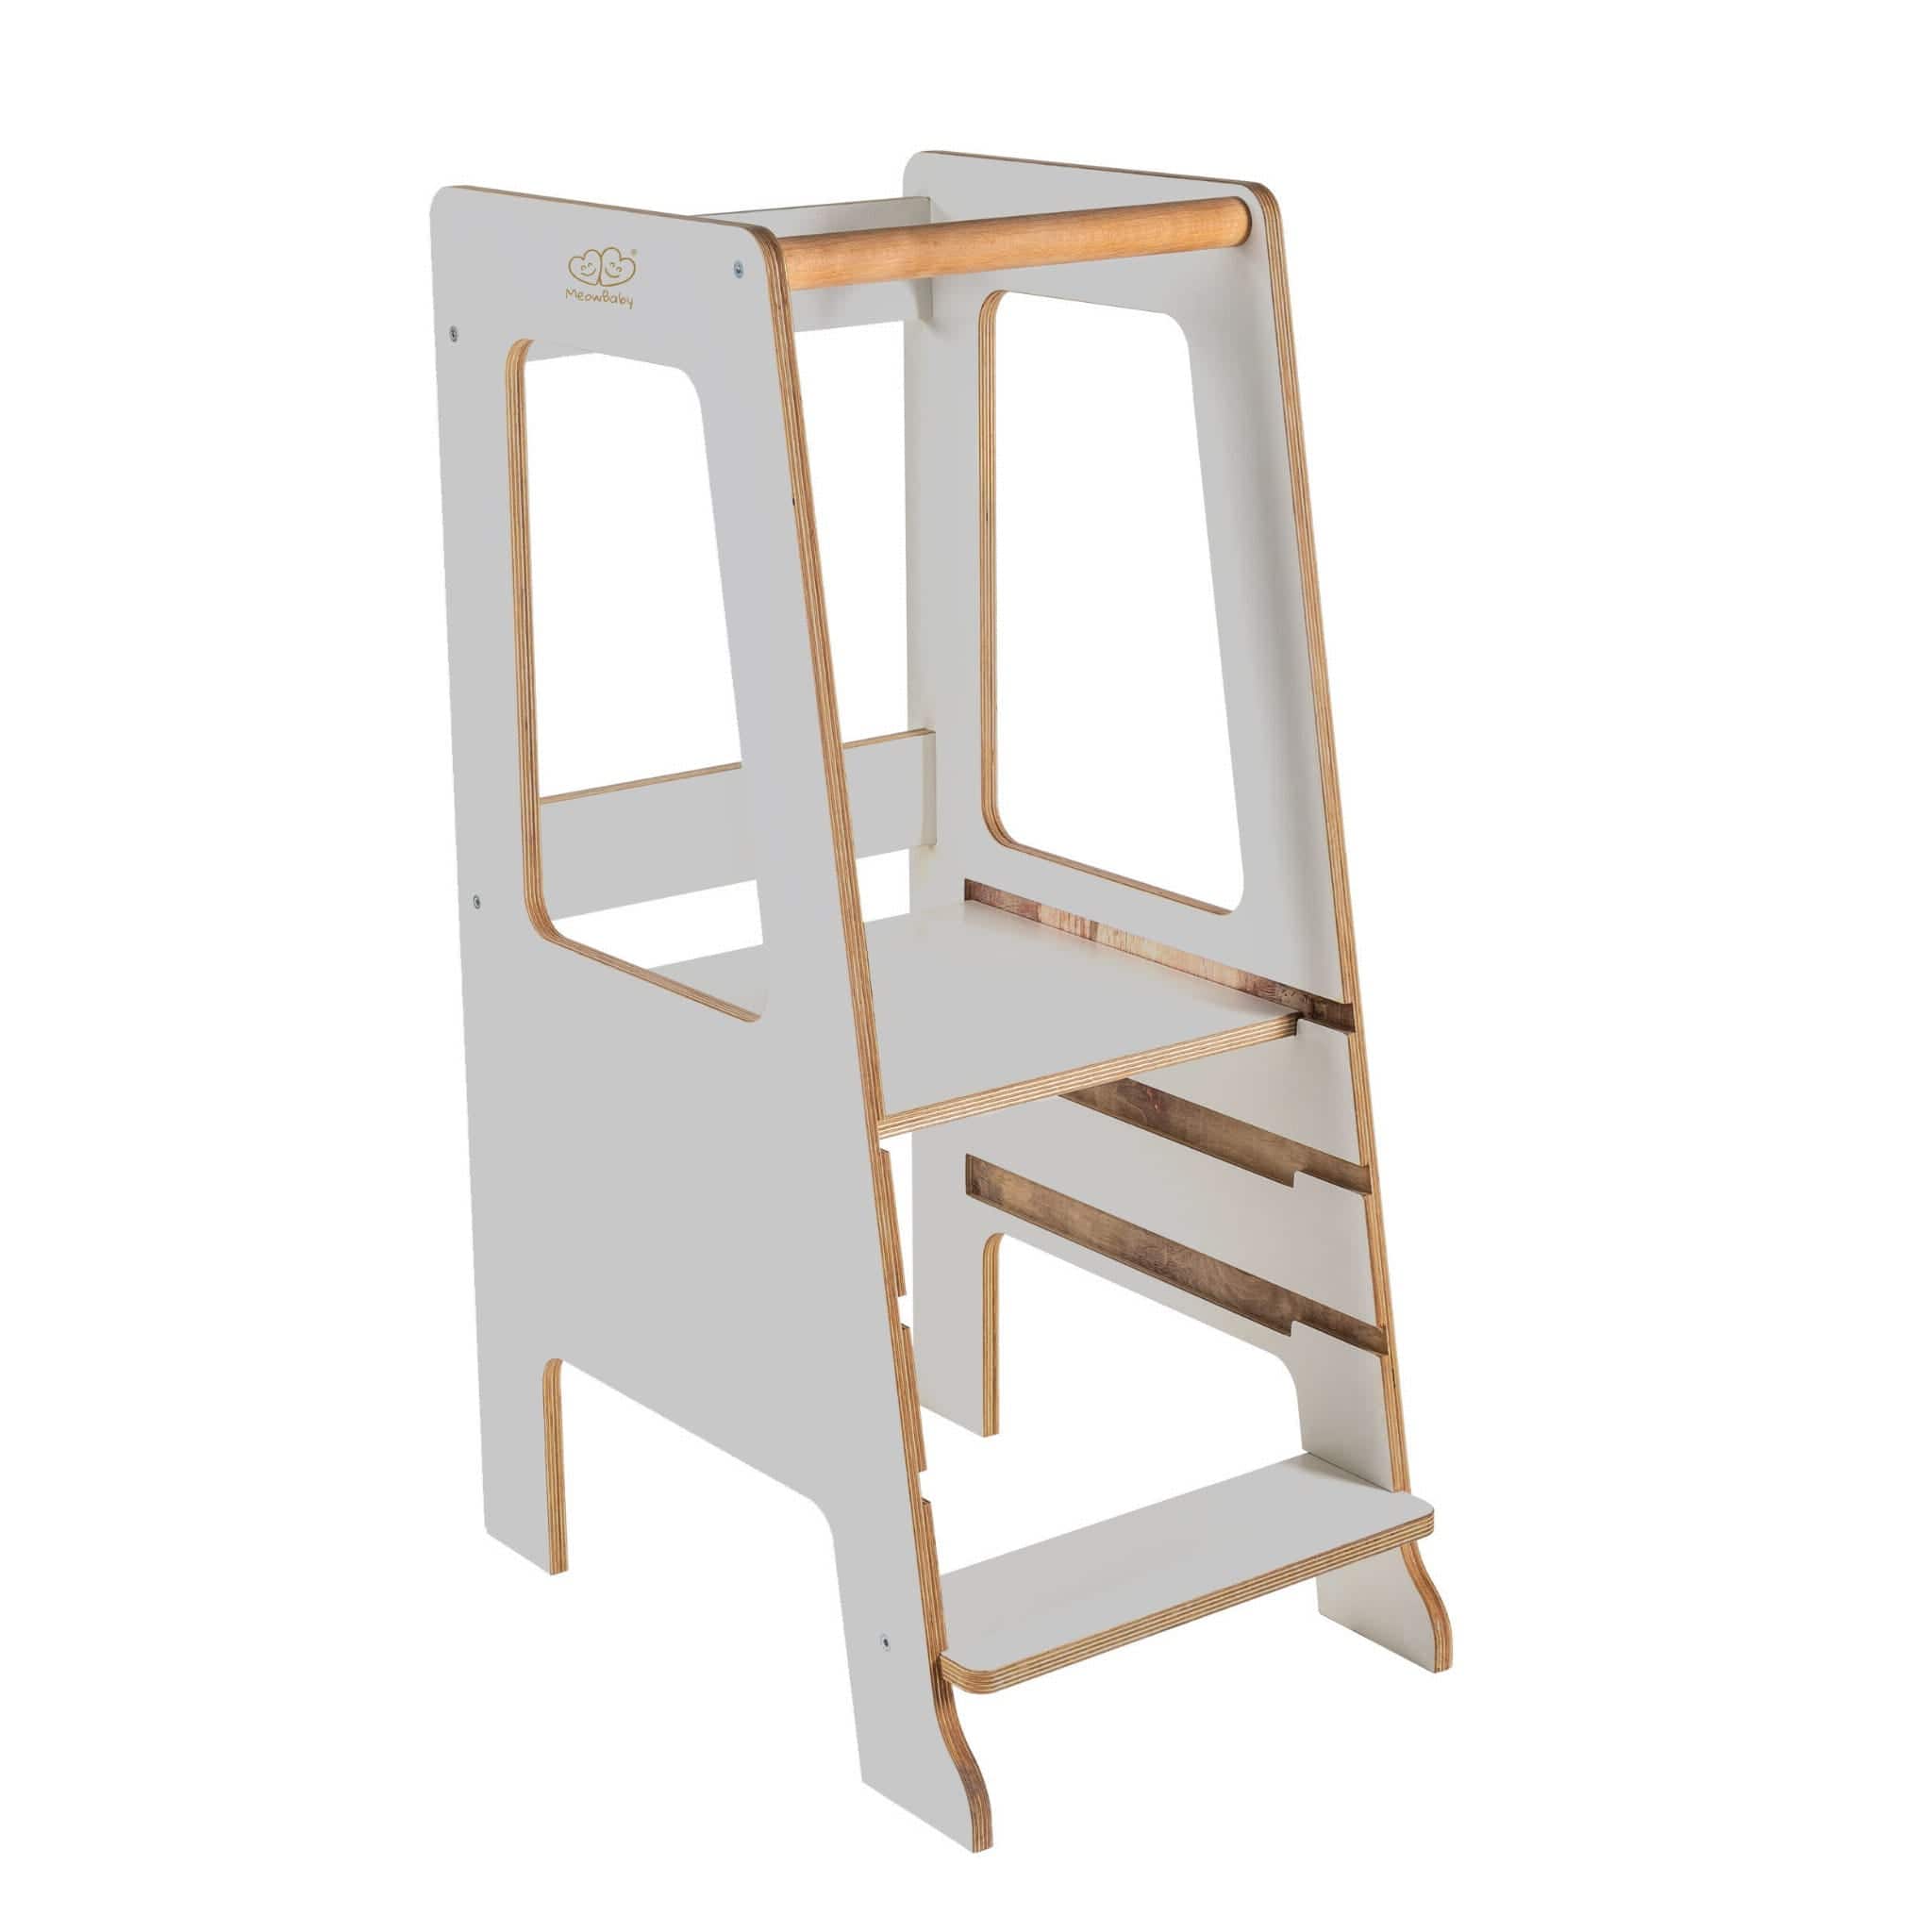 Wooden Kitchen Helper - Scandi Step Stool For Kids By MeowBaby